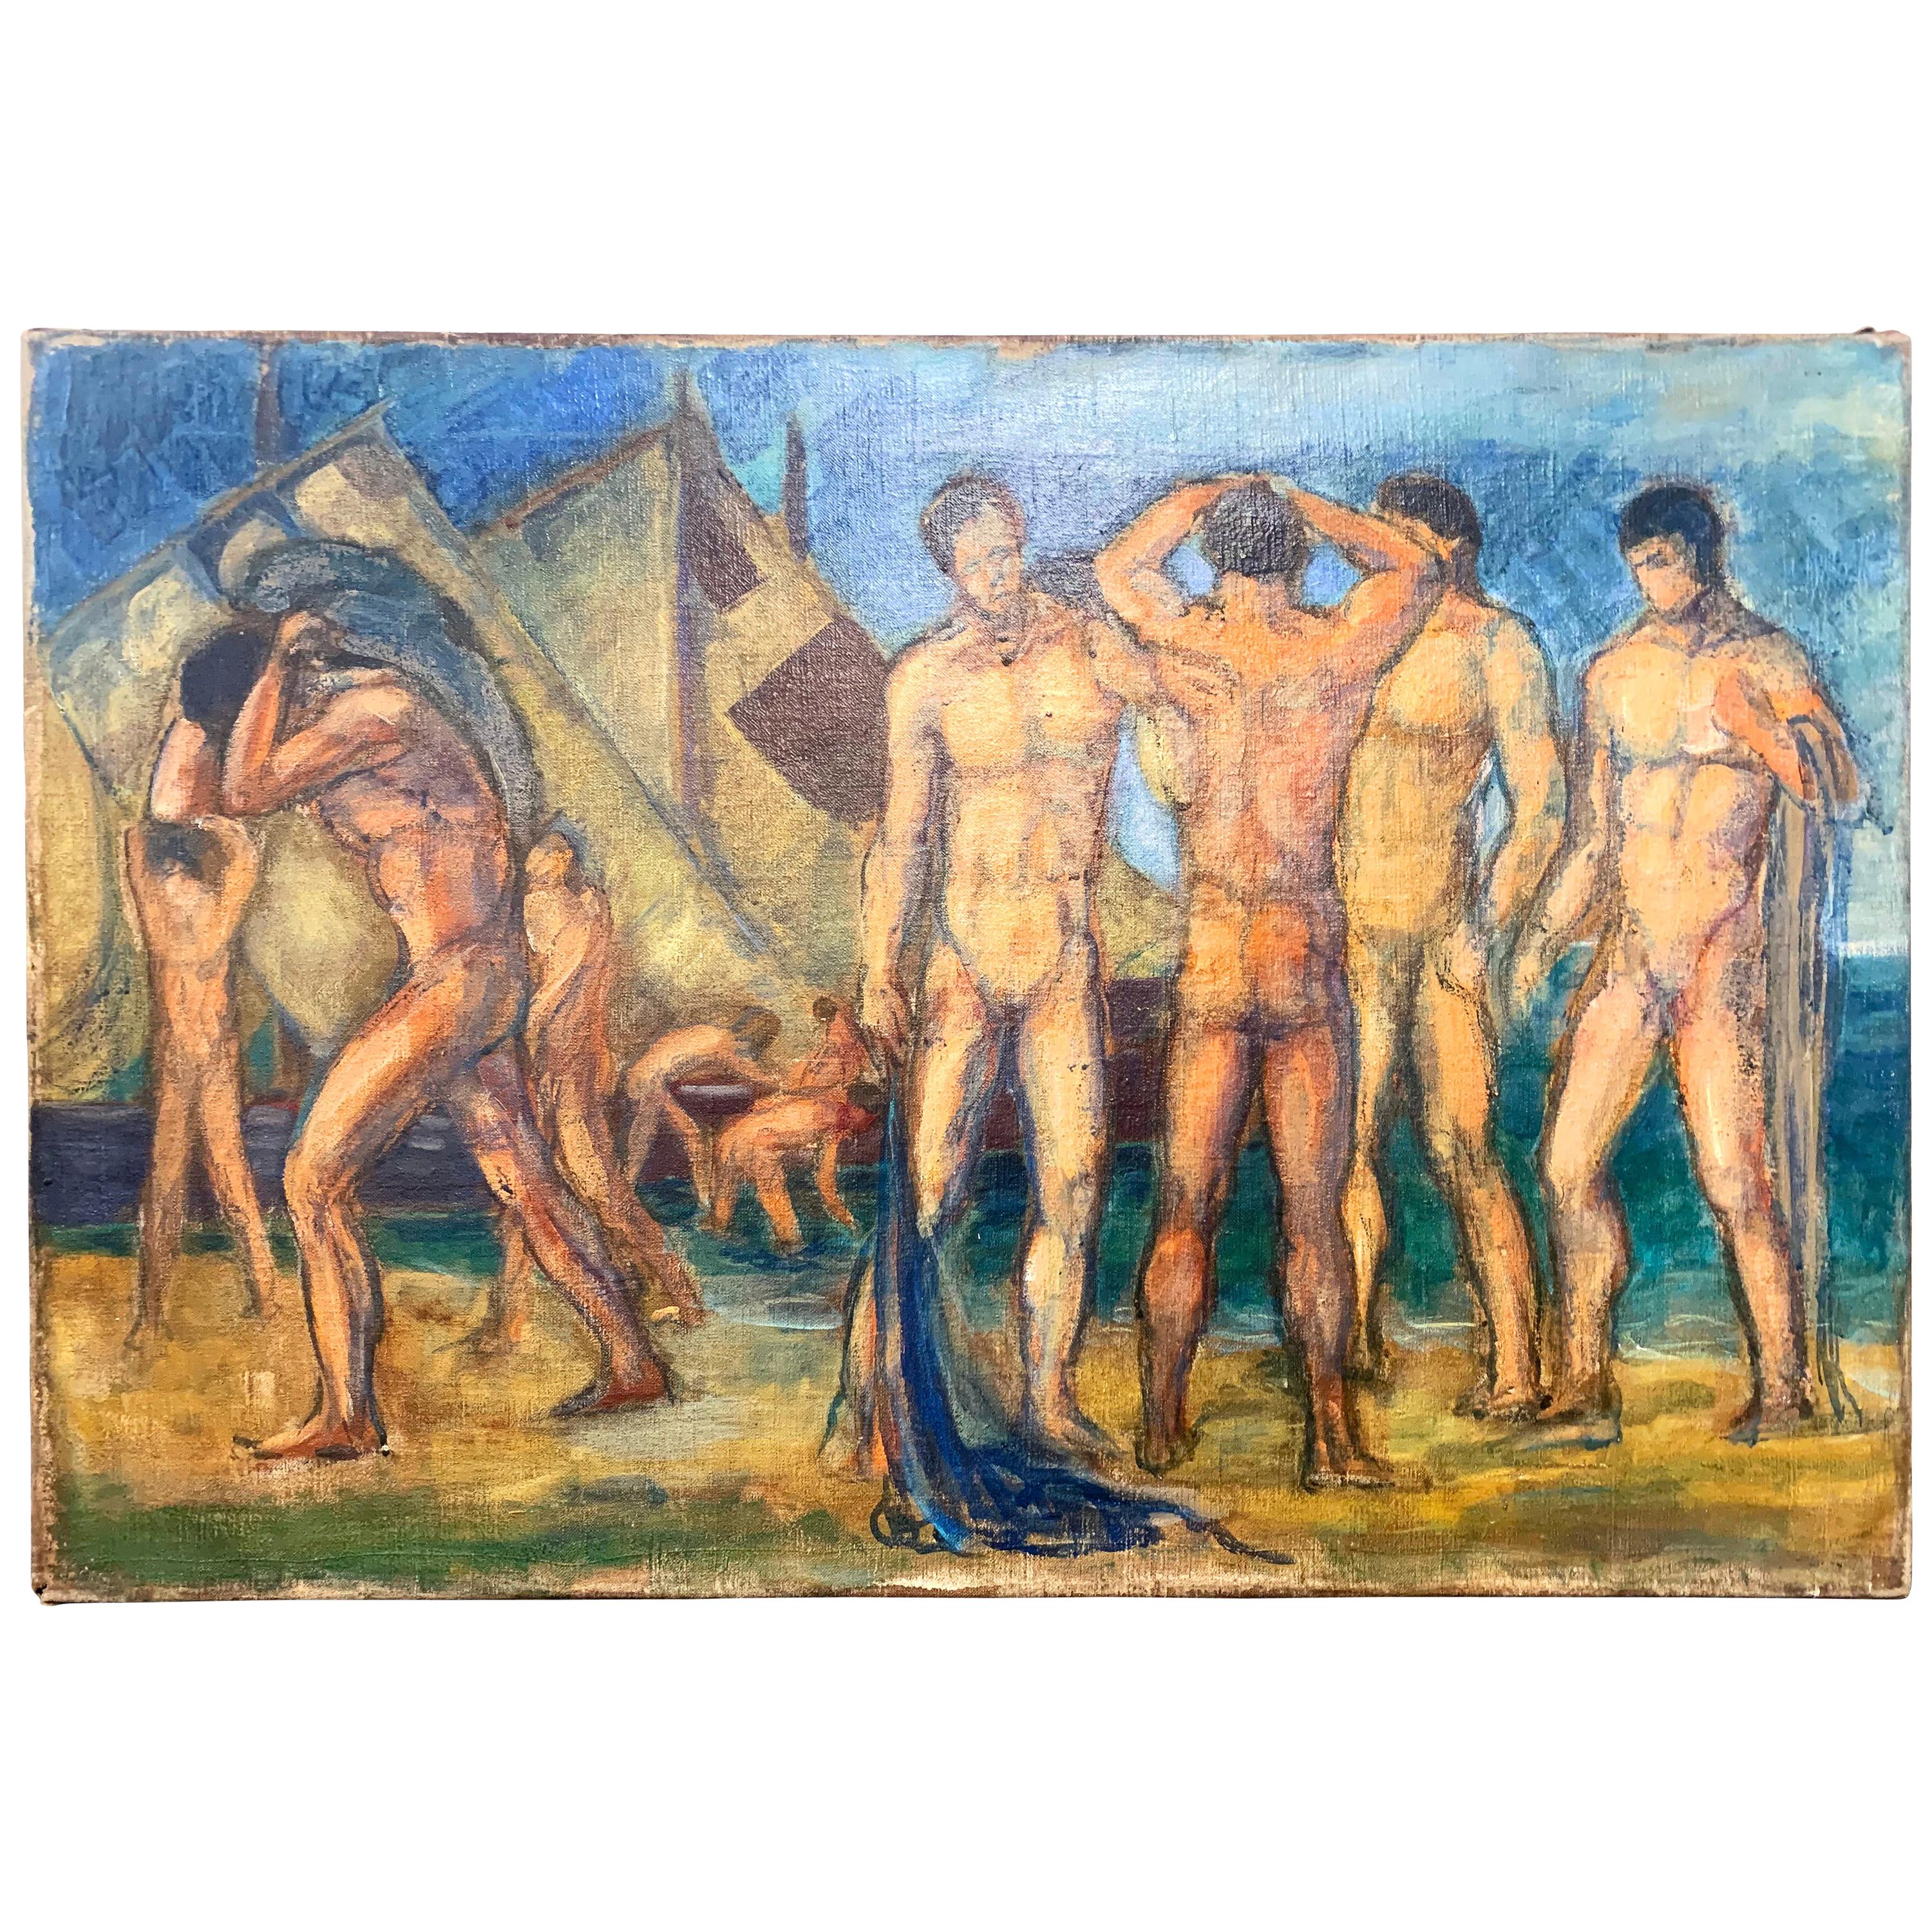 "Frieze of Nude Male Figures, " Art Deco Scene of Bathers and Workers, France